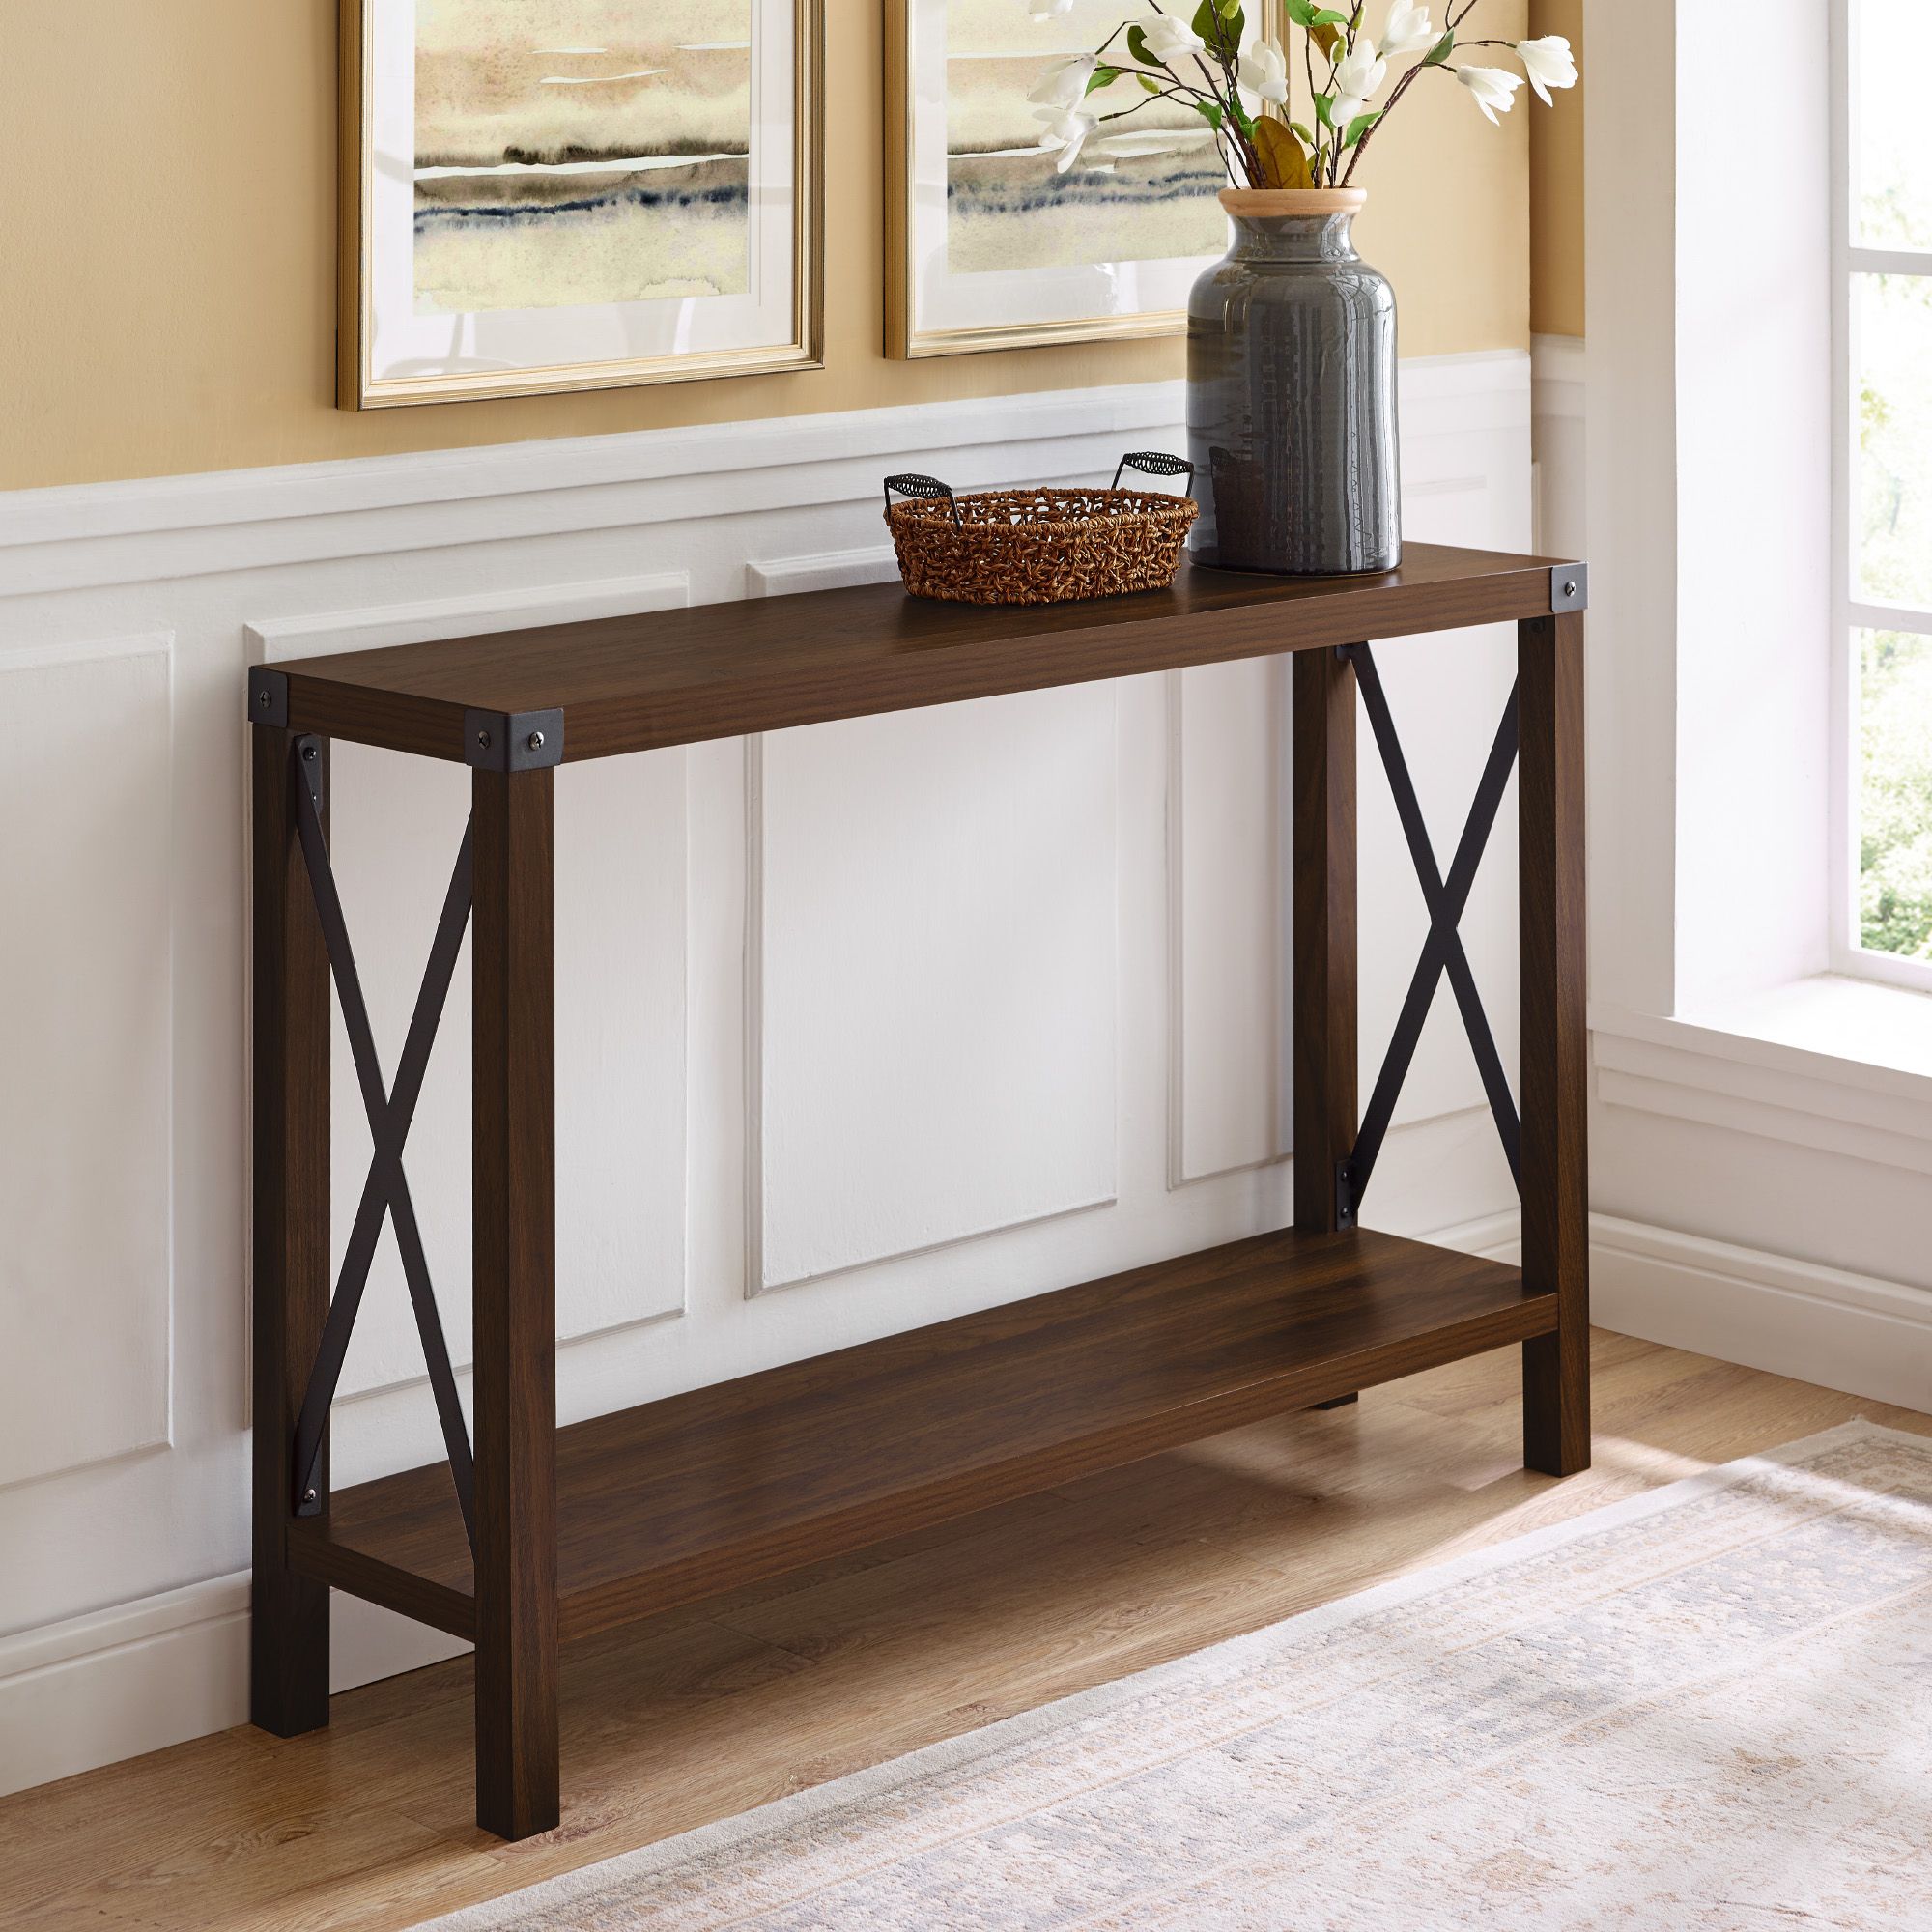 Woven Paths Magnolia Metal X Console Table, Dark Walnut – Walmart For Dark Walnut Console Tables (View 3 of 20)